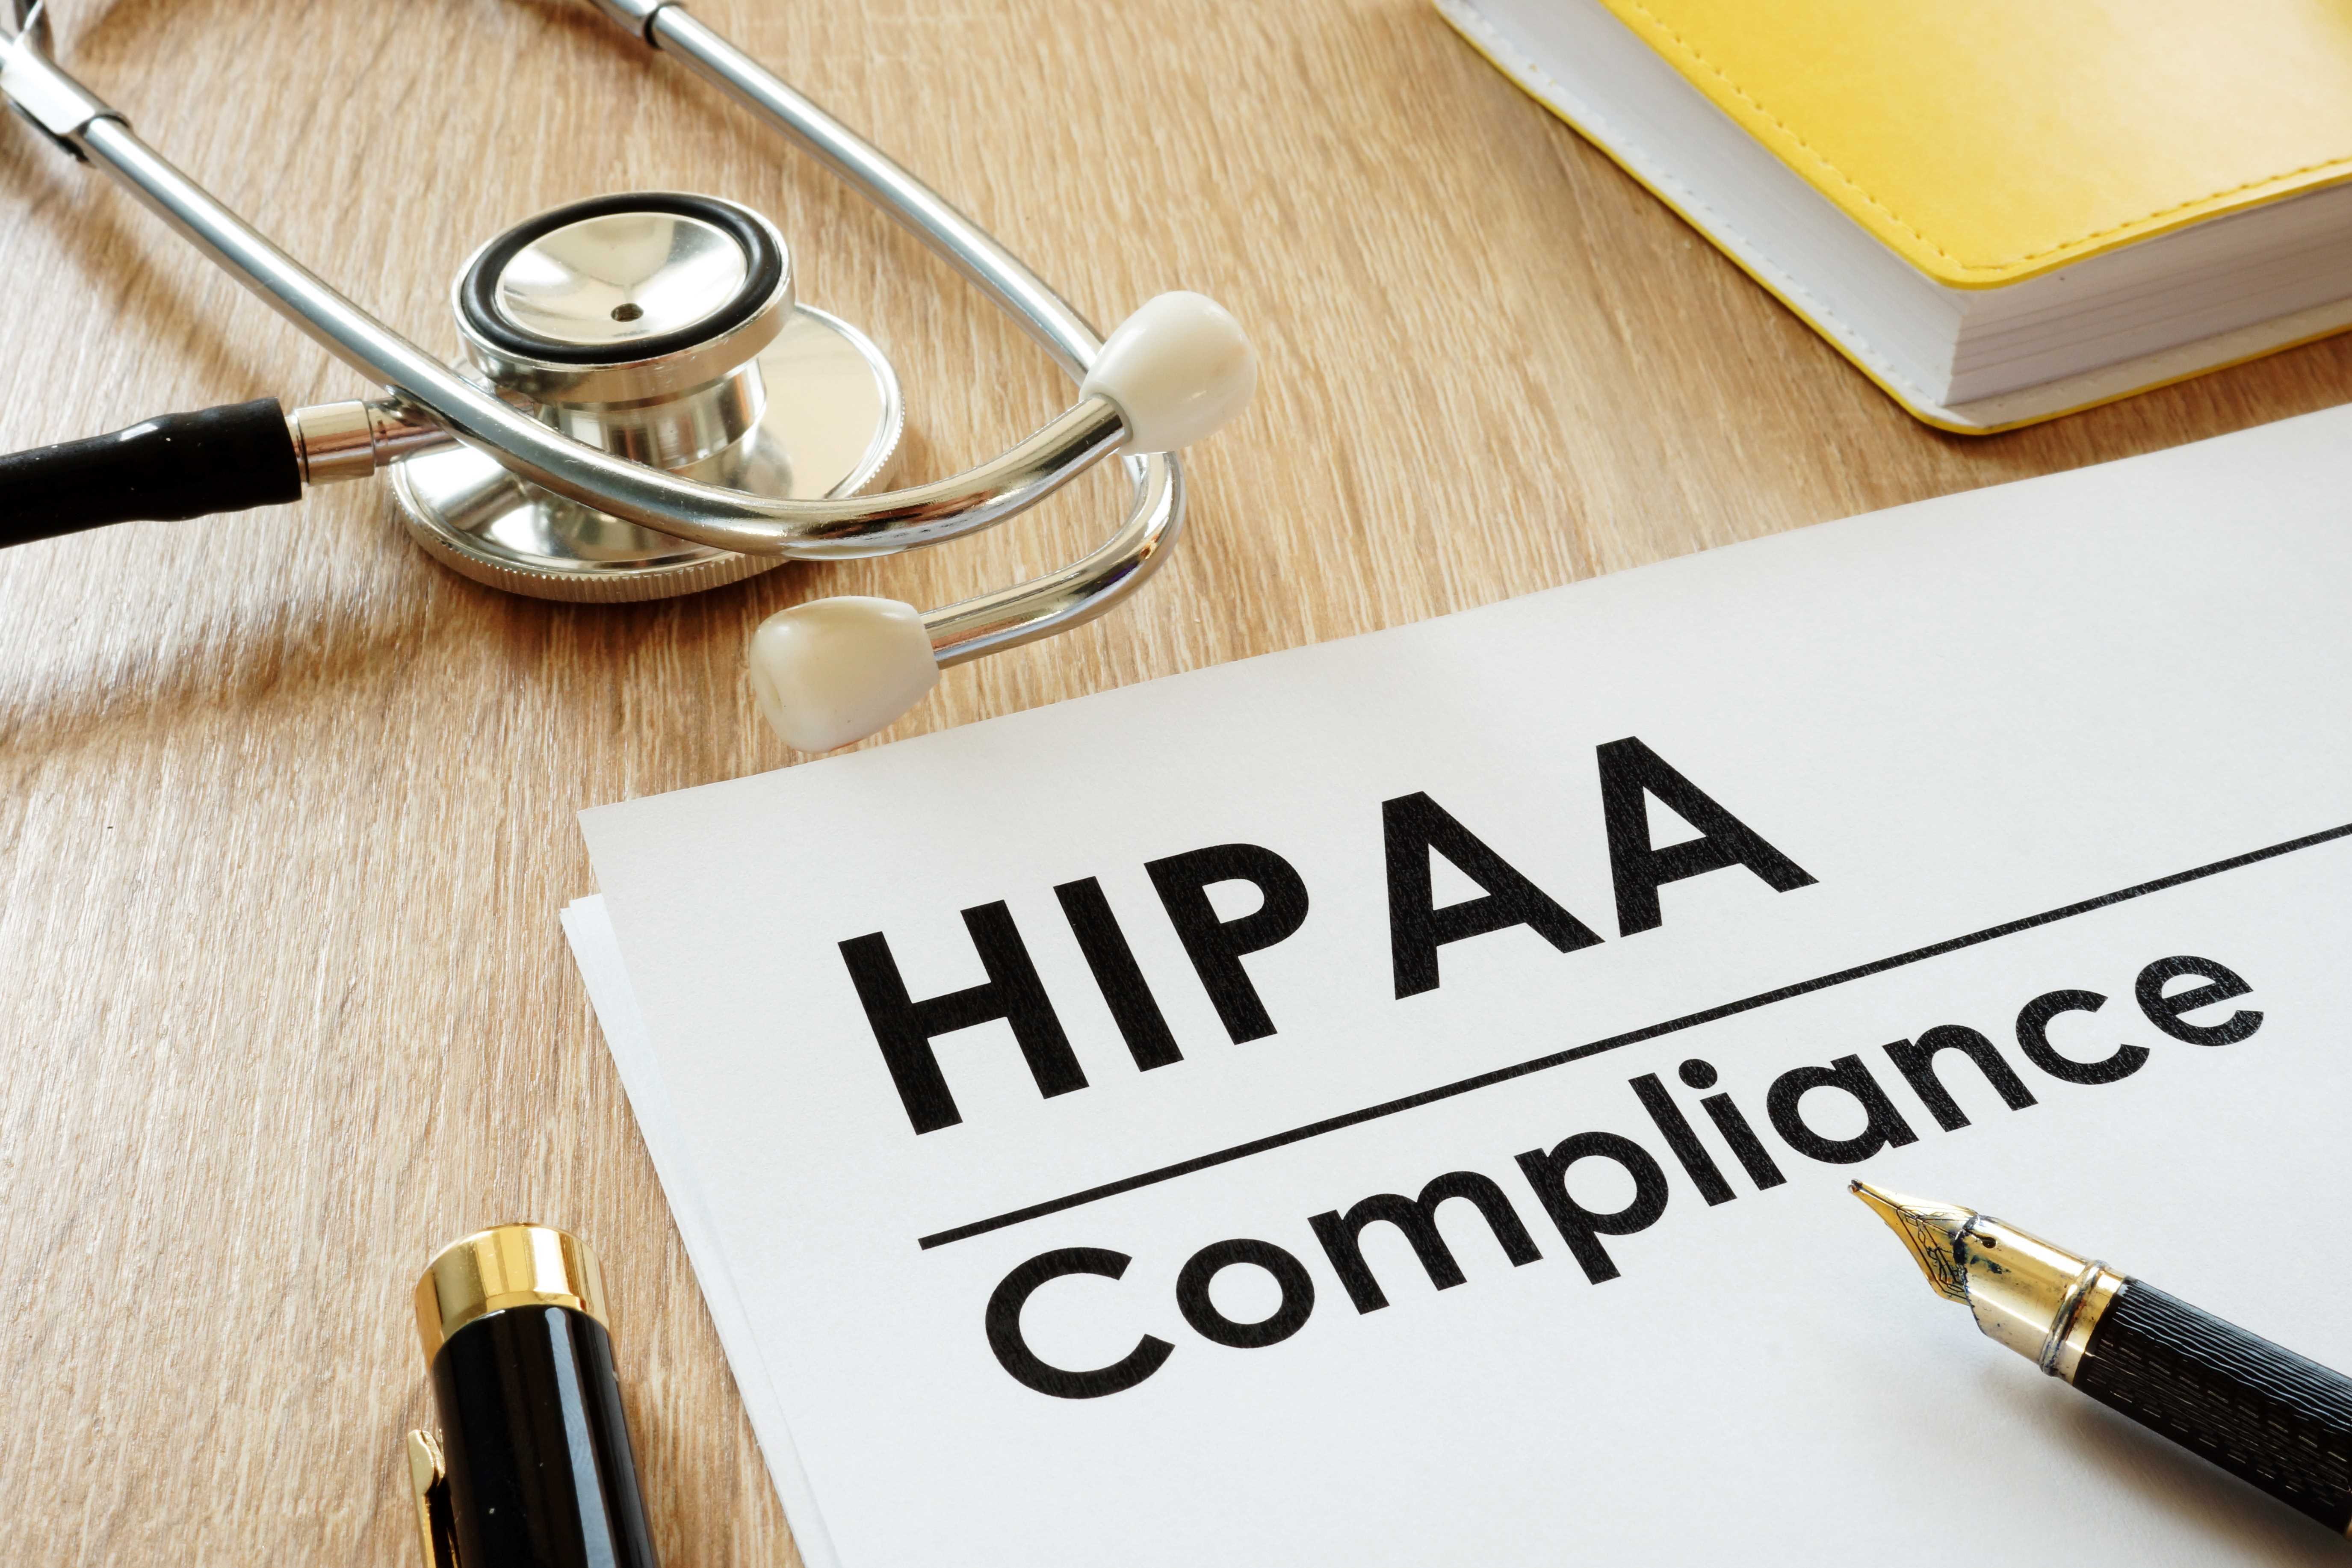 We have become HIPAA compliant